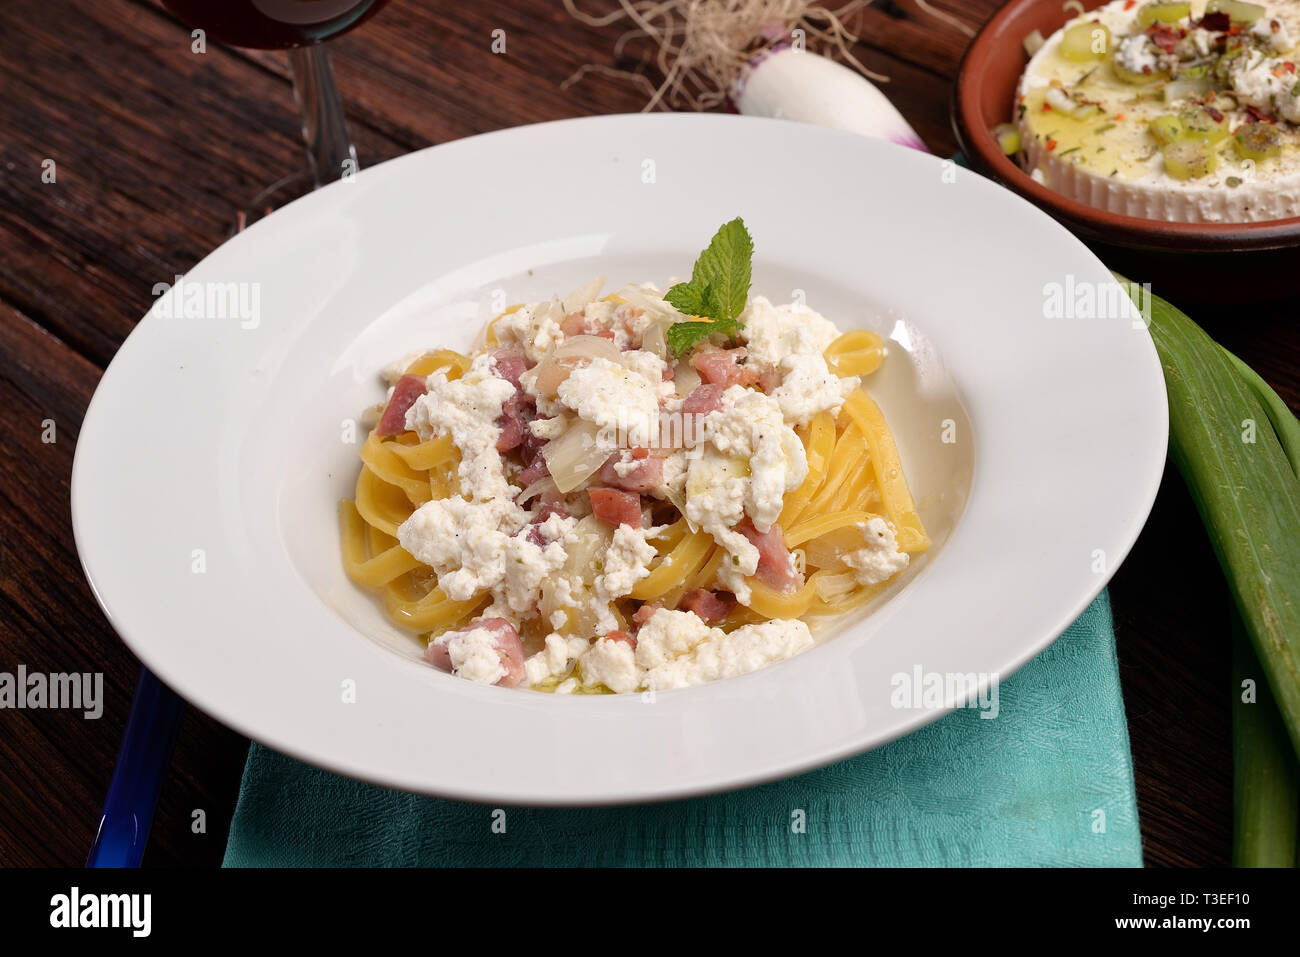 Dish Of Pasta Noodles With Cottage Cheese Bacon And Onion Shallot